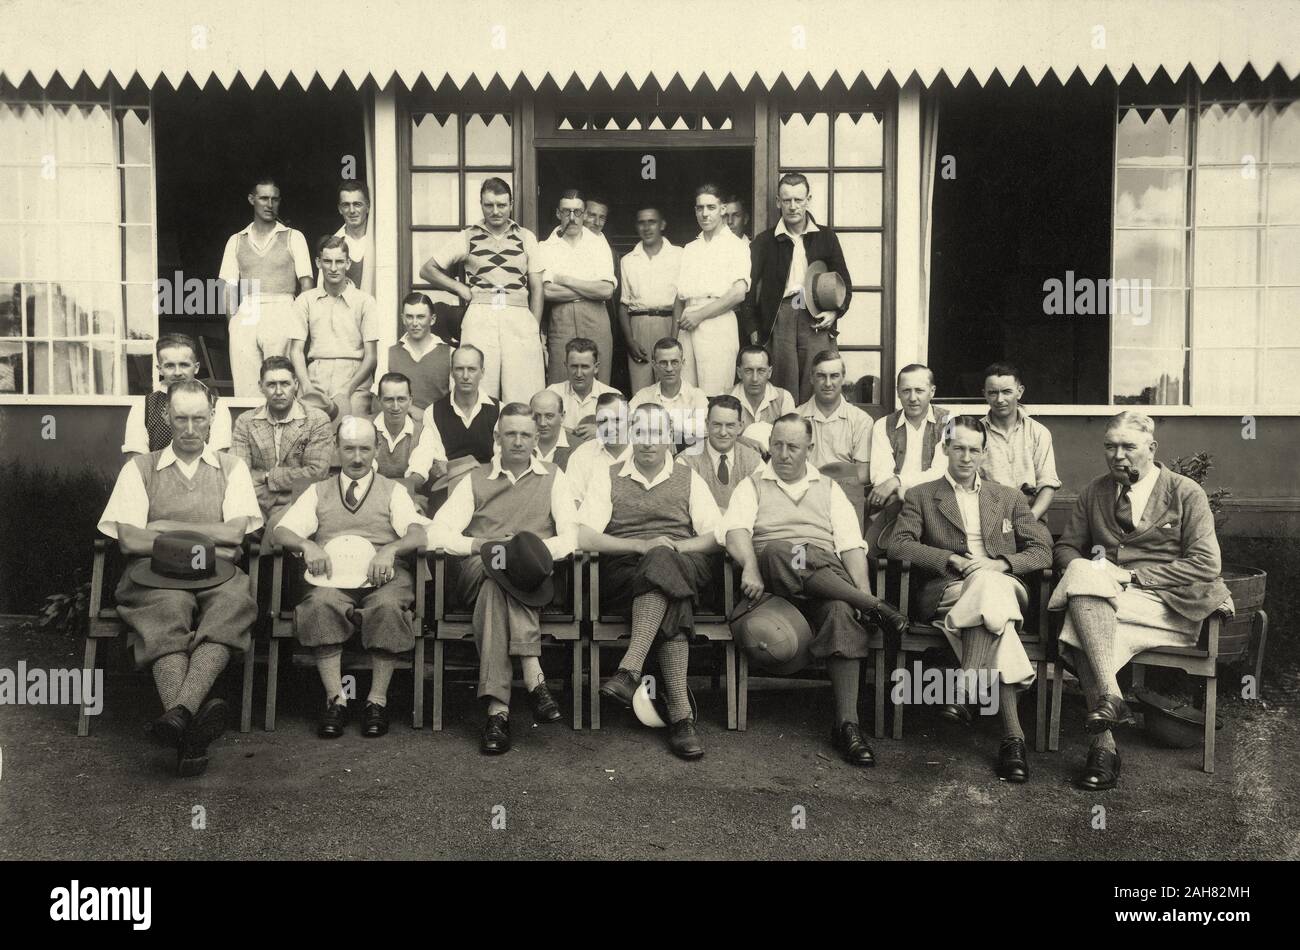 Kenya, Group photograph of European men in plus fours outside a sports pavilion. The occasion appears to be a match between the Muthaiga and Railway Golf Clubs, and Parlane Macfarlane is seated in the front row.Original manuscript caption: Muthaiga & Rly14/5/33Stamped copyright notice: PHOTO By EAST AFRICAN STANDARD Ltd. NAIROBI, 14 May 1933. 1999/135/1/1/24. Stock Photo